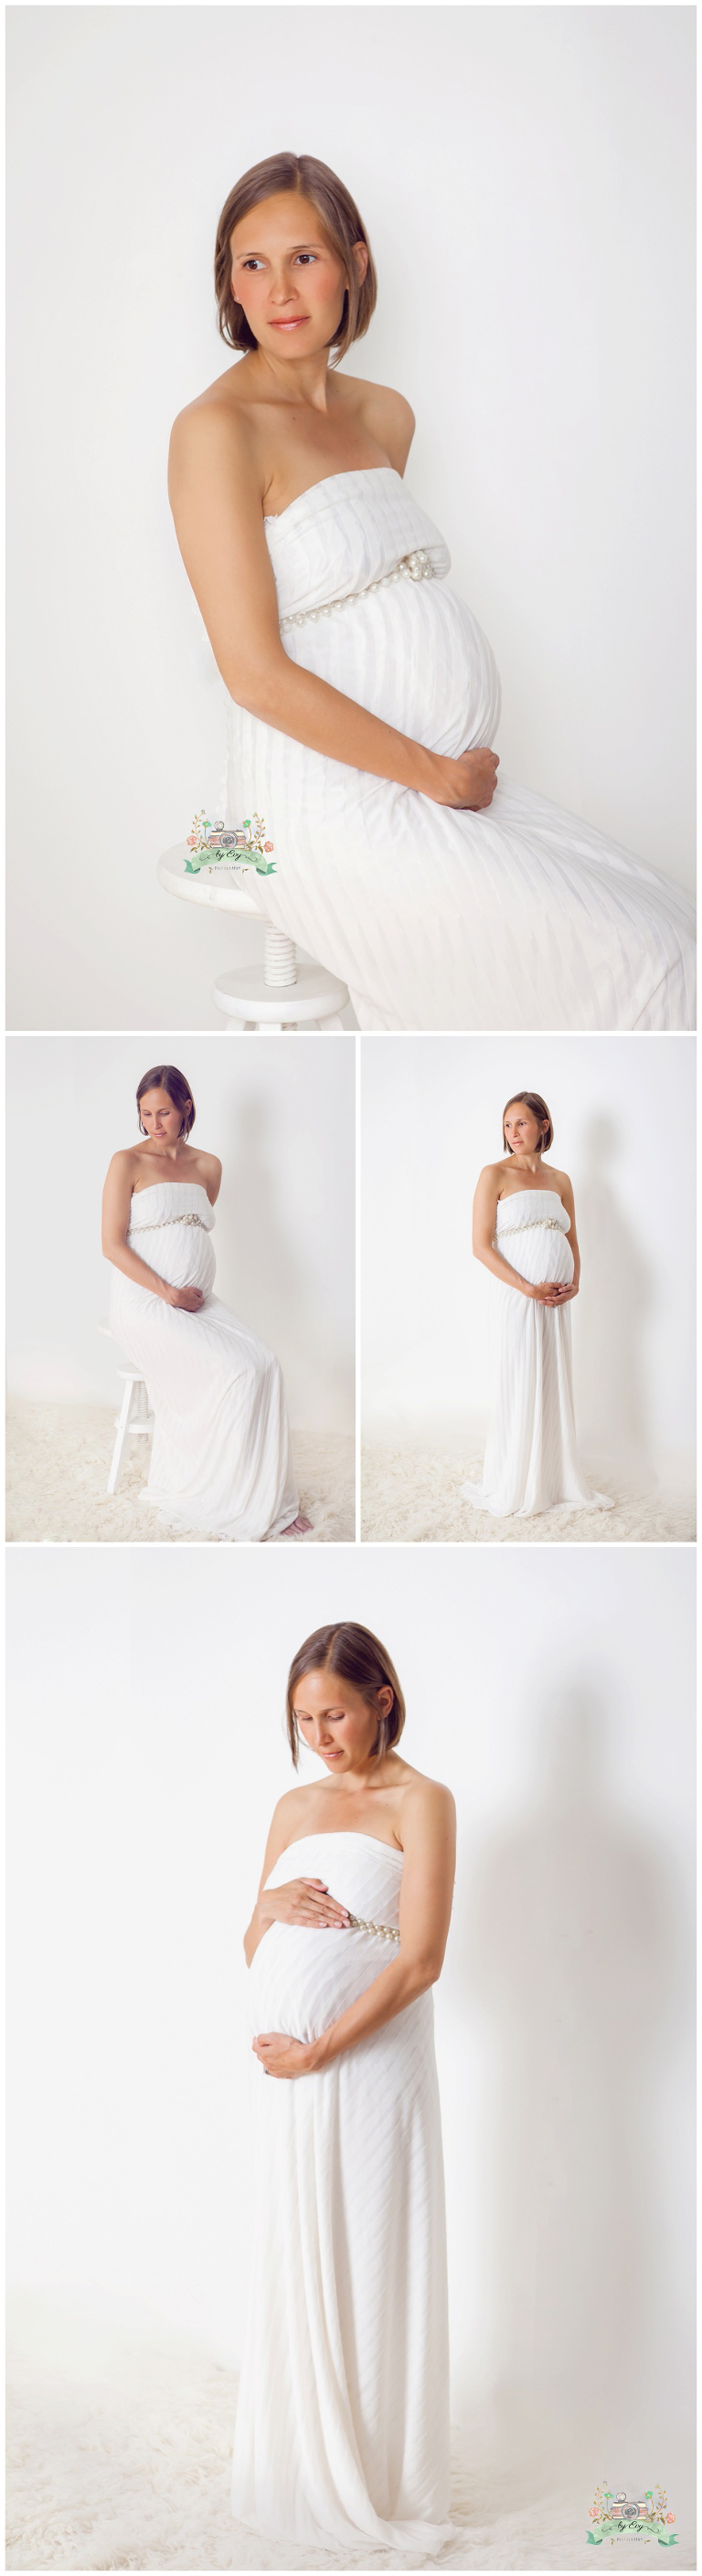 By Evy Photography |Maternity photography